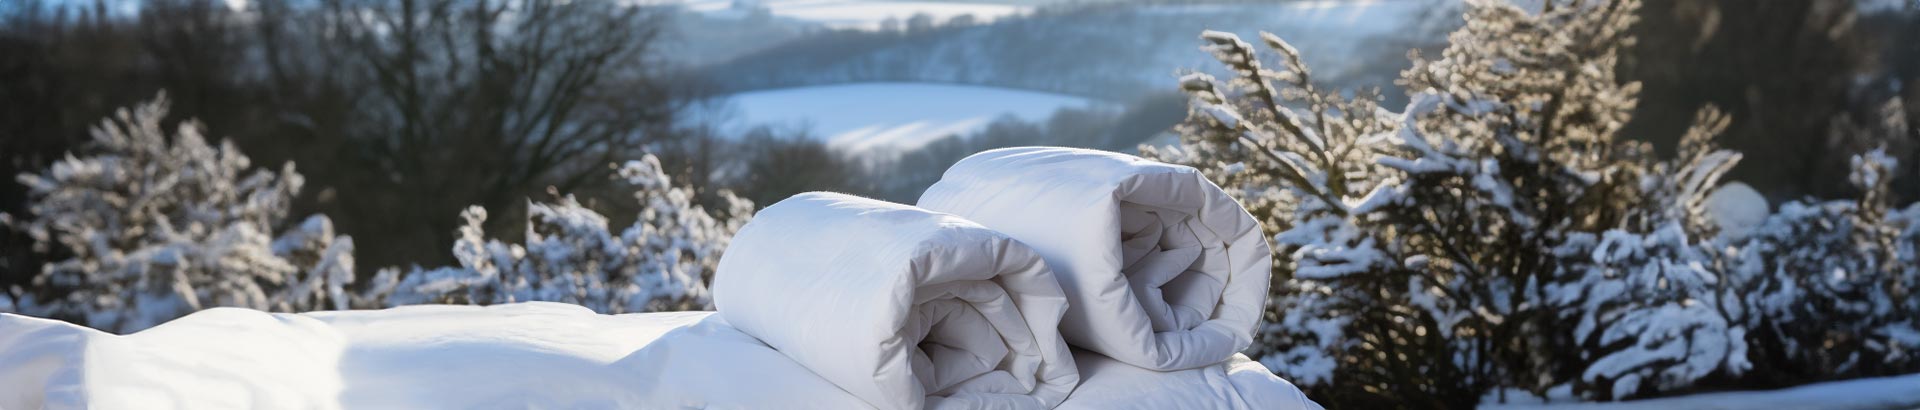 Winter duvet options displayed amidst a snowy English country landscape, featuring the unique temperature-regulating THREE Duvets sections.